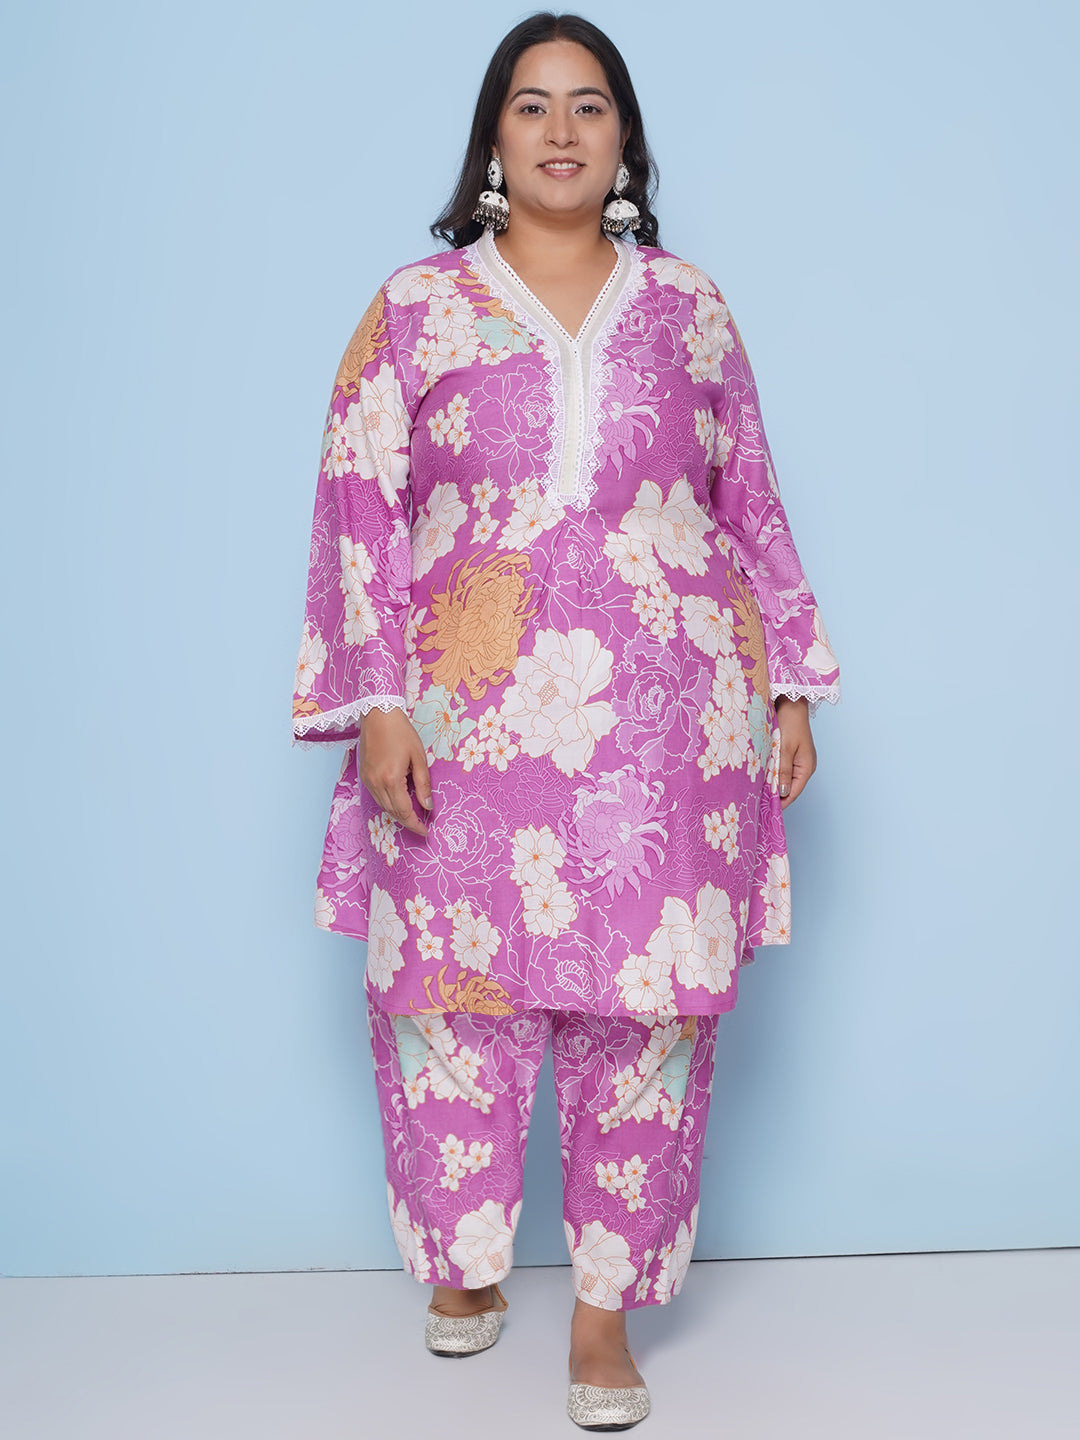 Purple color floral print kurta with lace detailing on sleeves and neck with Purple floral print pant